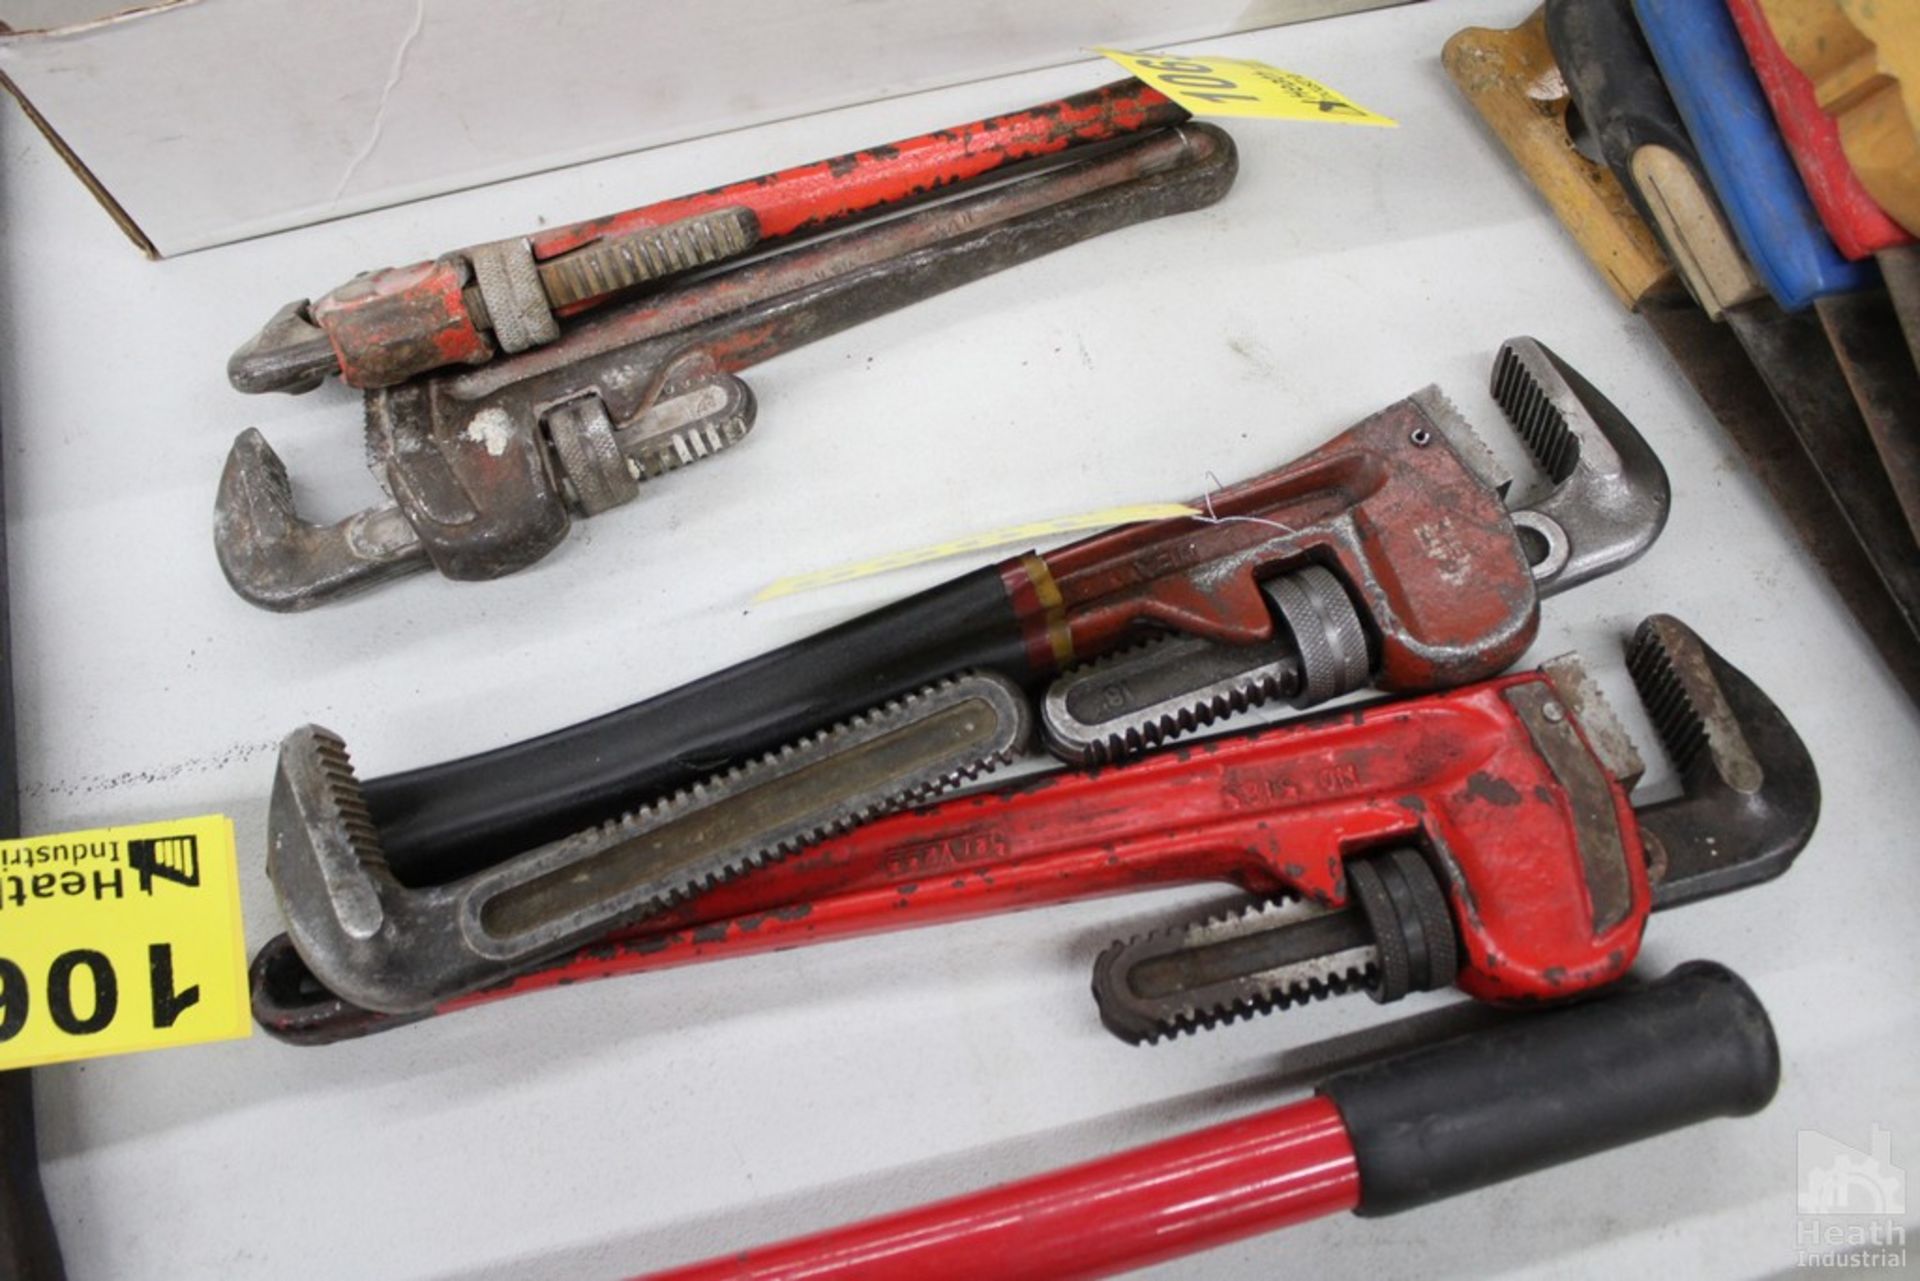 (2) 18" PIPE WRENCHES